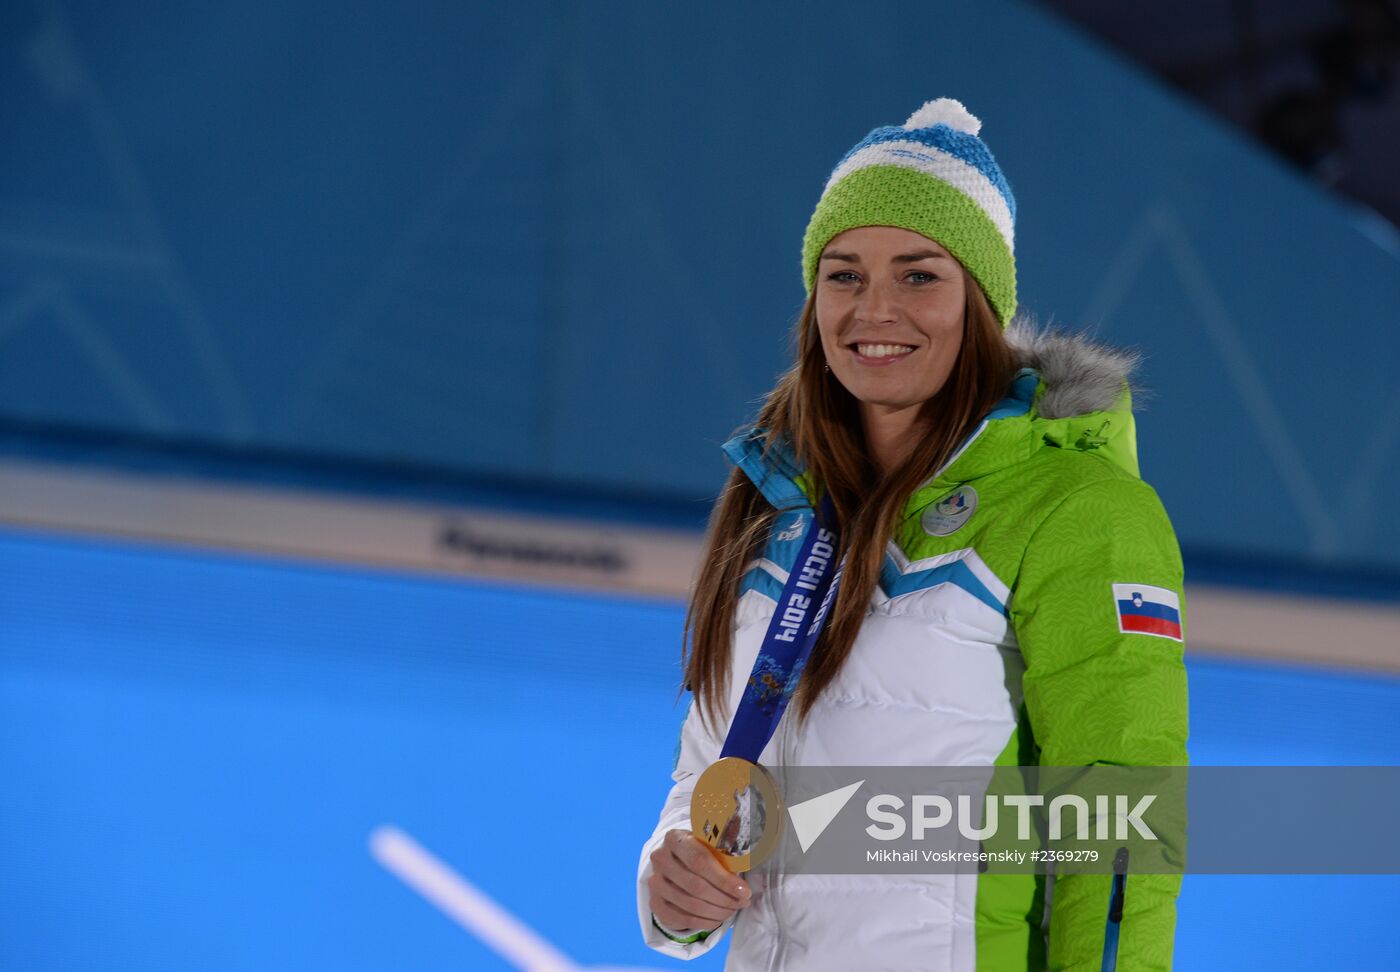 2014 Winter Olympics. Medal ceremony. Day Five